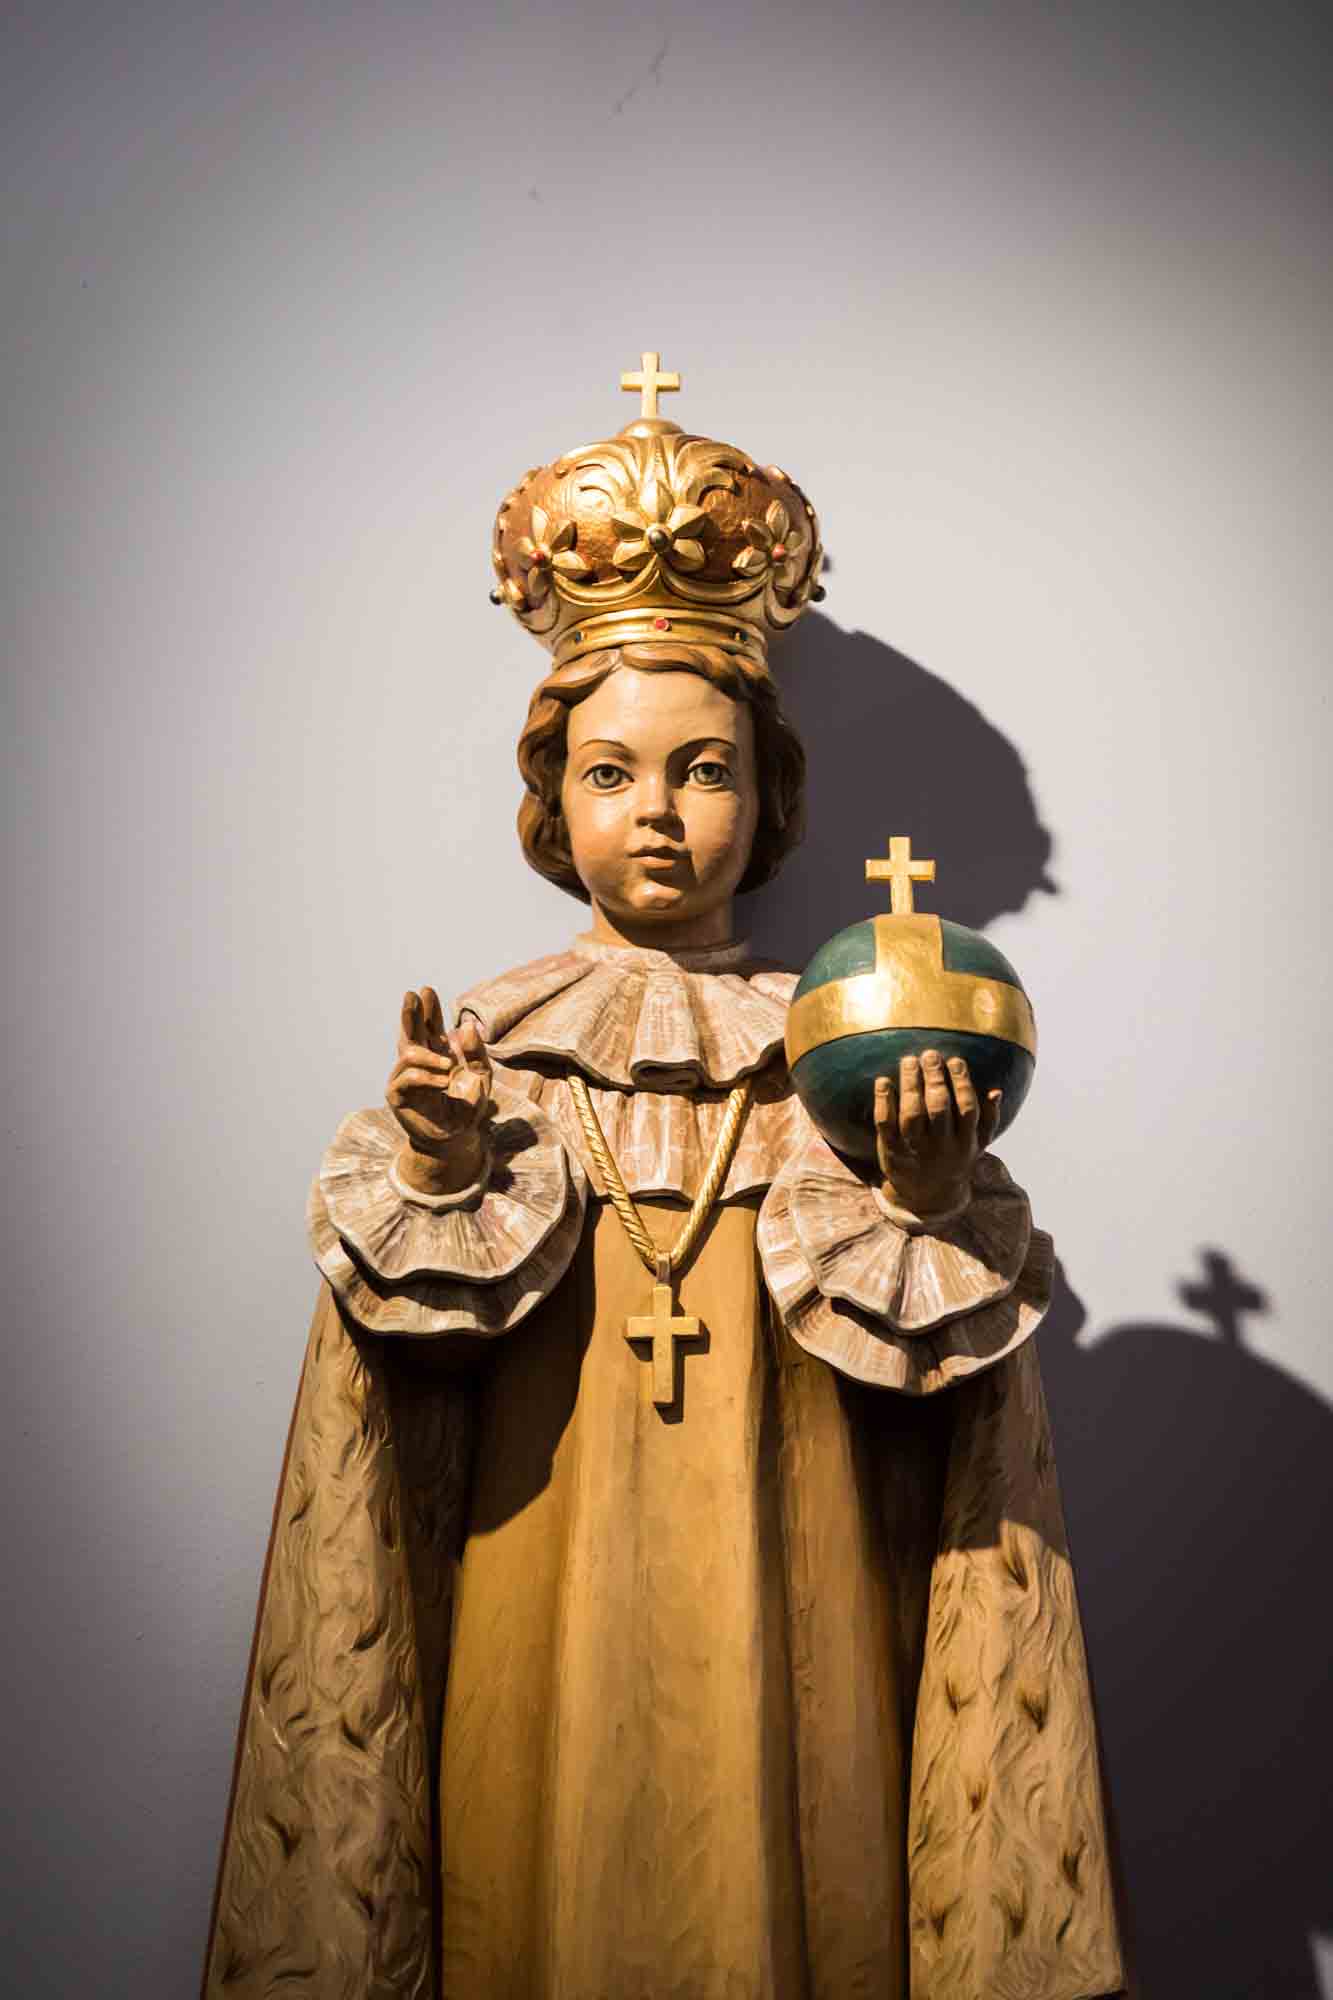 Golden religious statue in Our Lady of Hope Roman Catholic Church